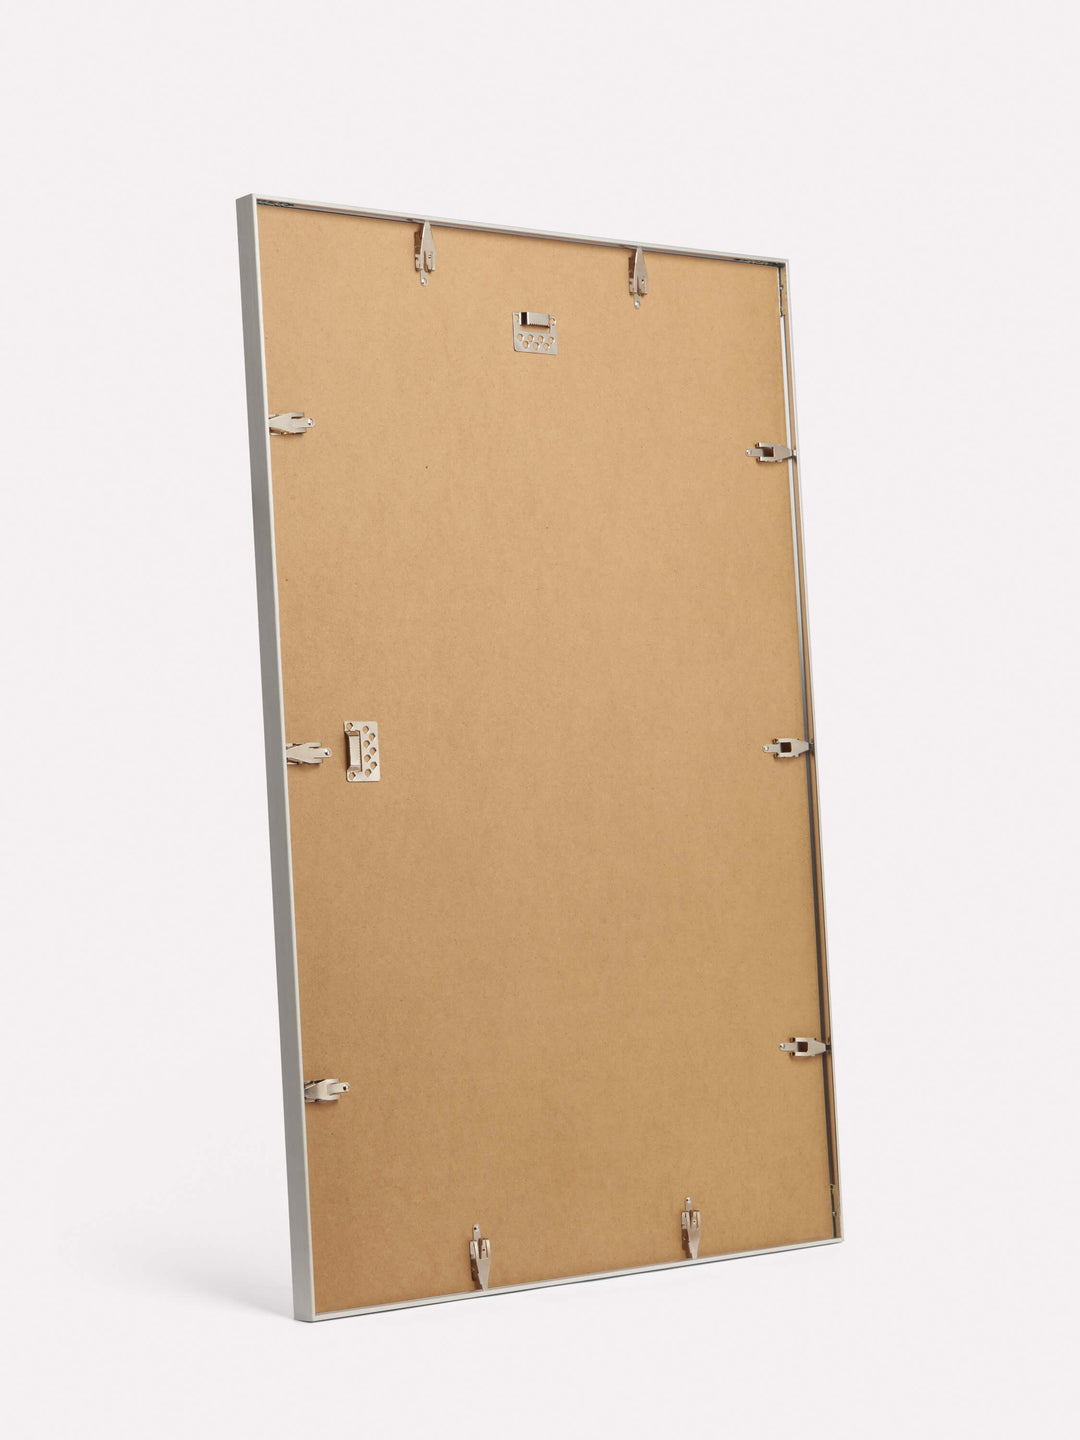 20x30-inch Thin Frame, White - Back view